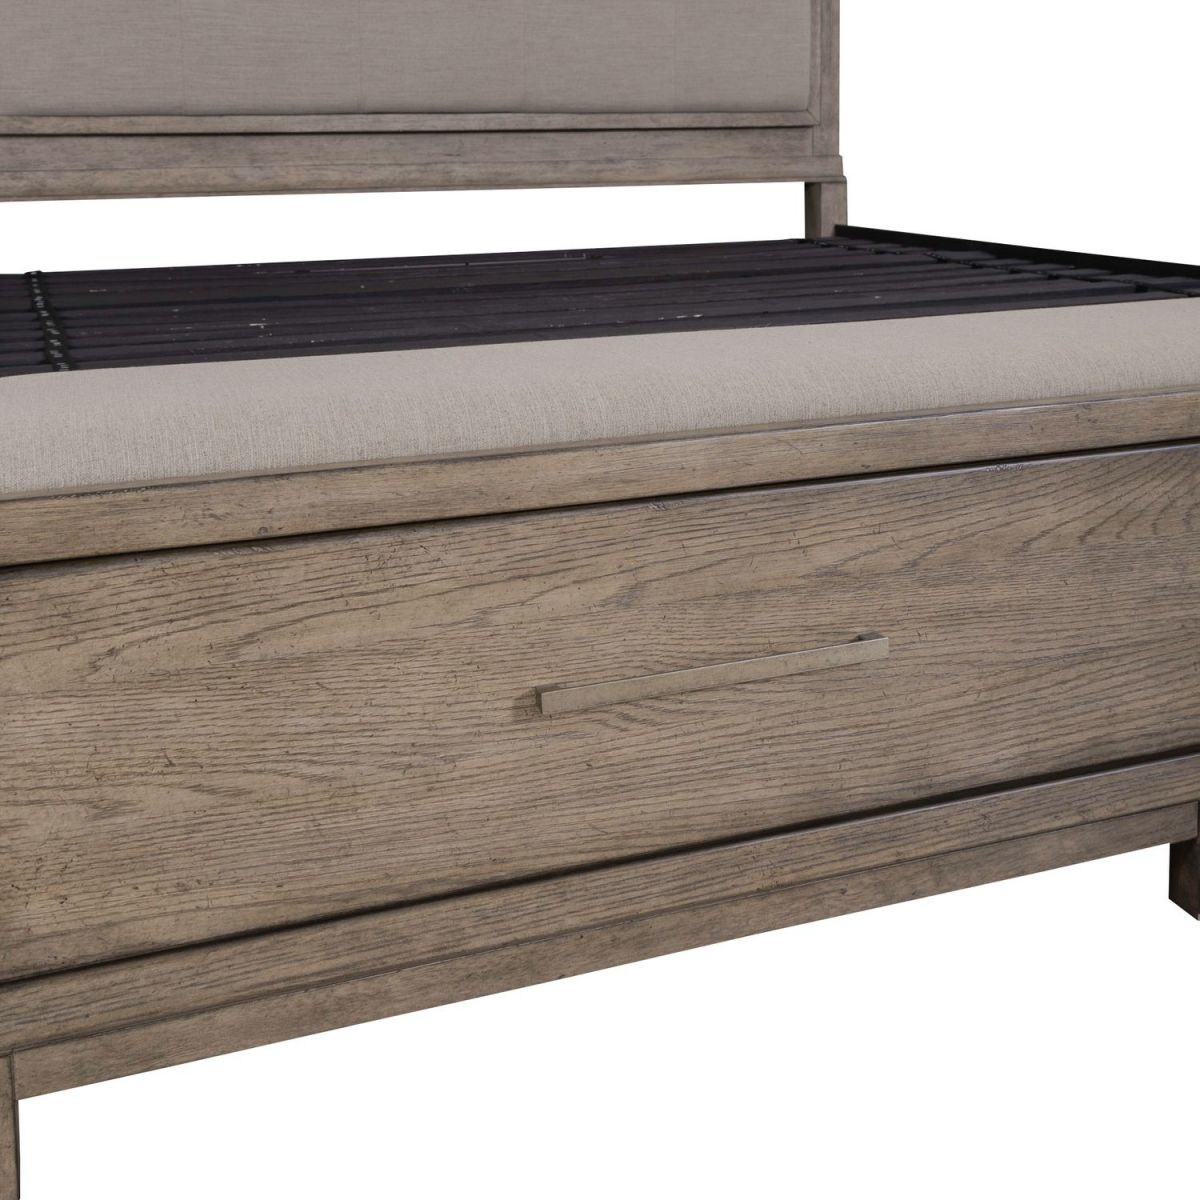 Picture of GIRALDO KING BED WITH STORAGE